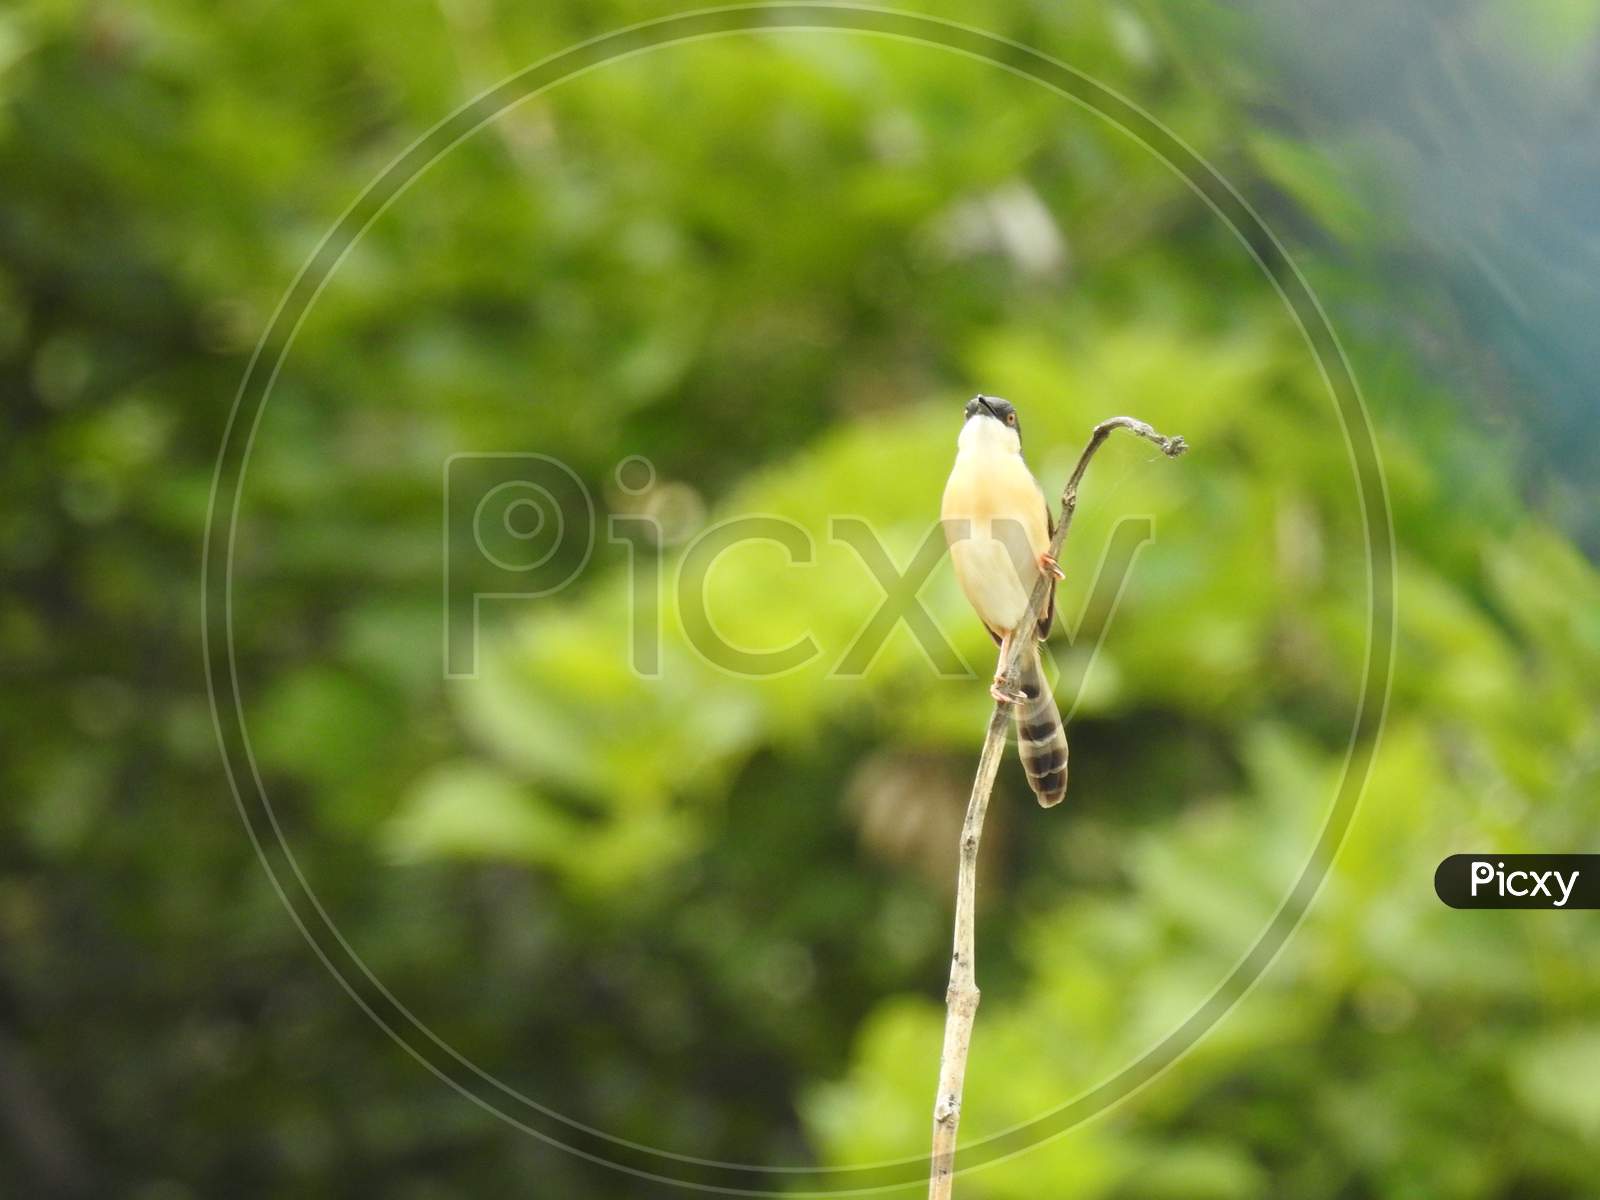 Closeup of Indian cute small Red Breasted Nuthatch Bird sitting above the stick and wire in a nature background